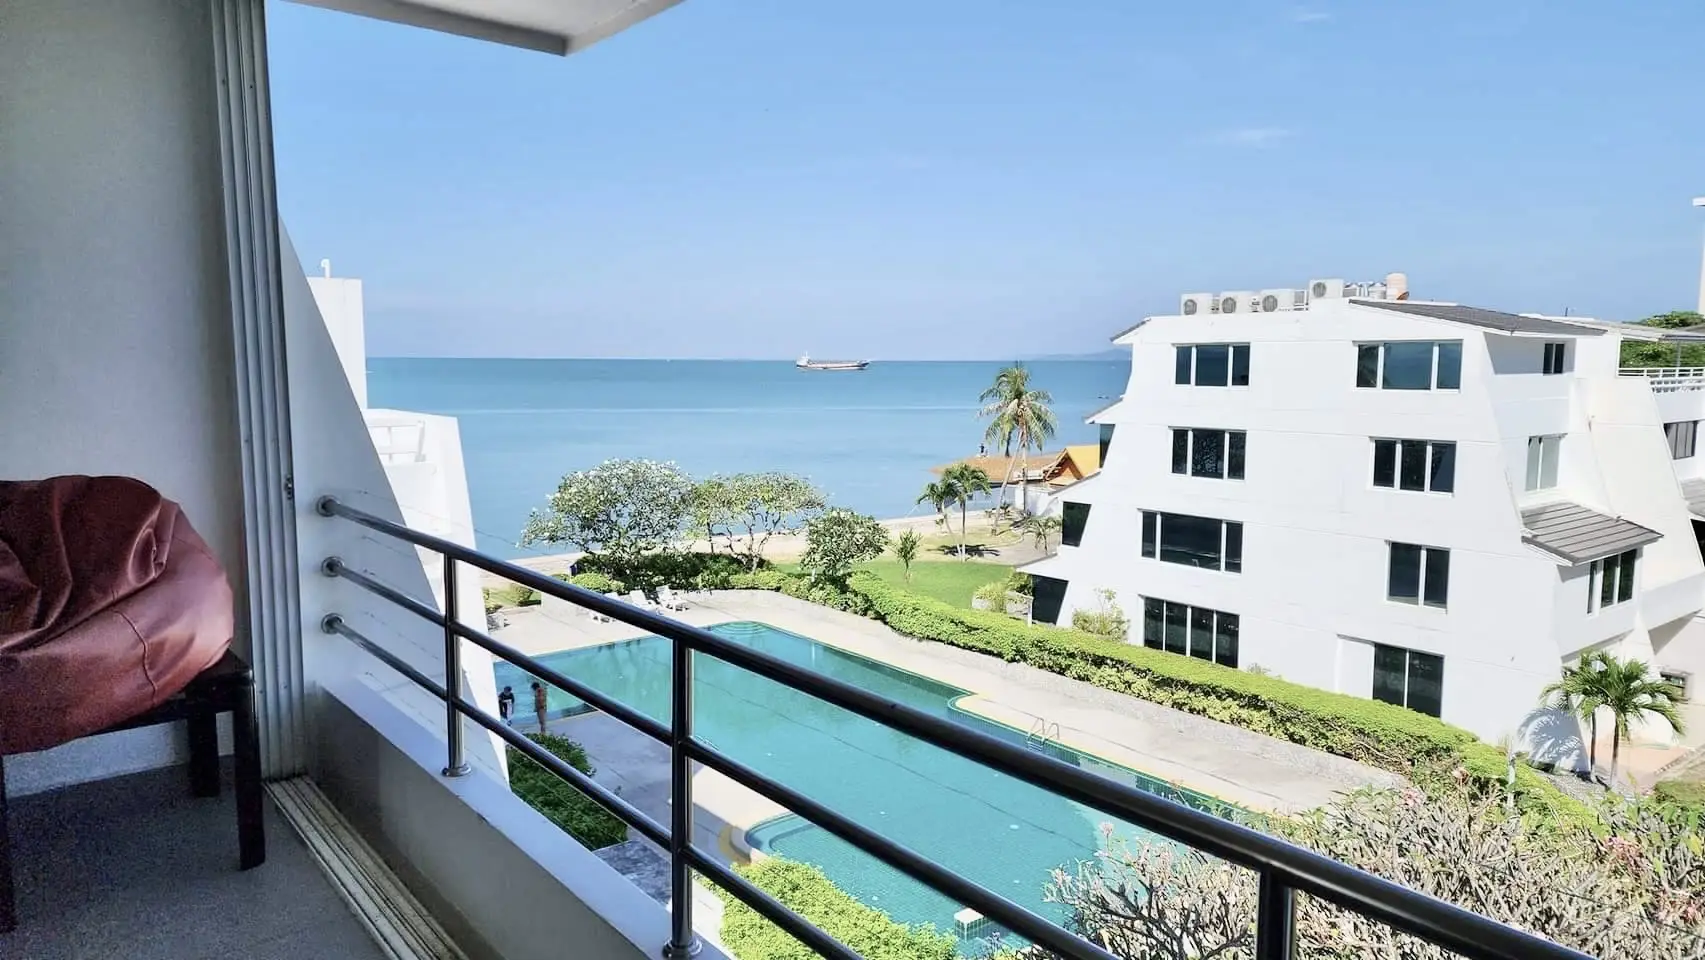 Townhouse Chomtalay Resort for rent in Pattaya